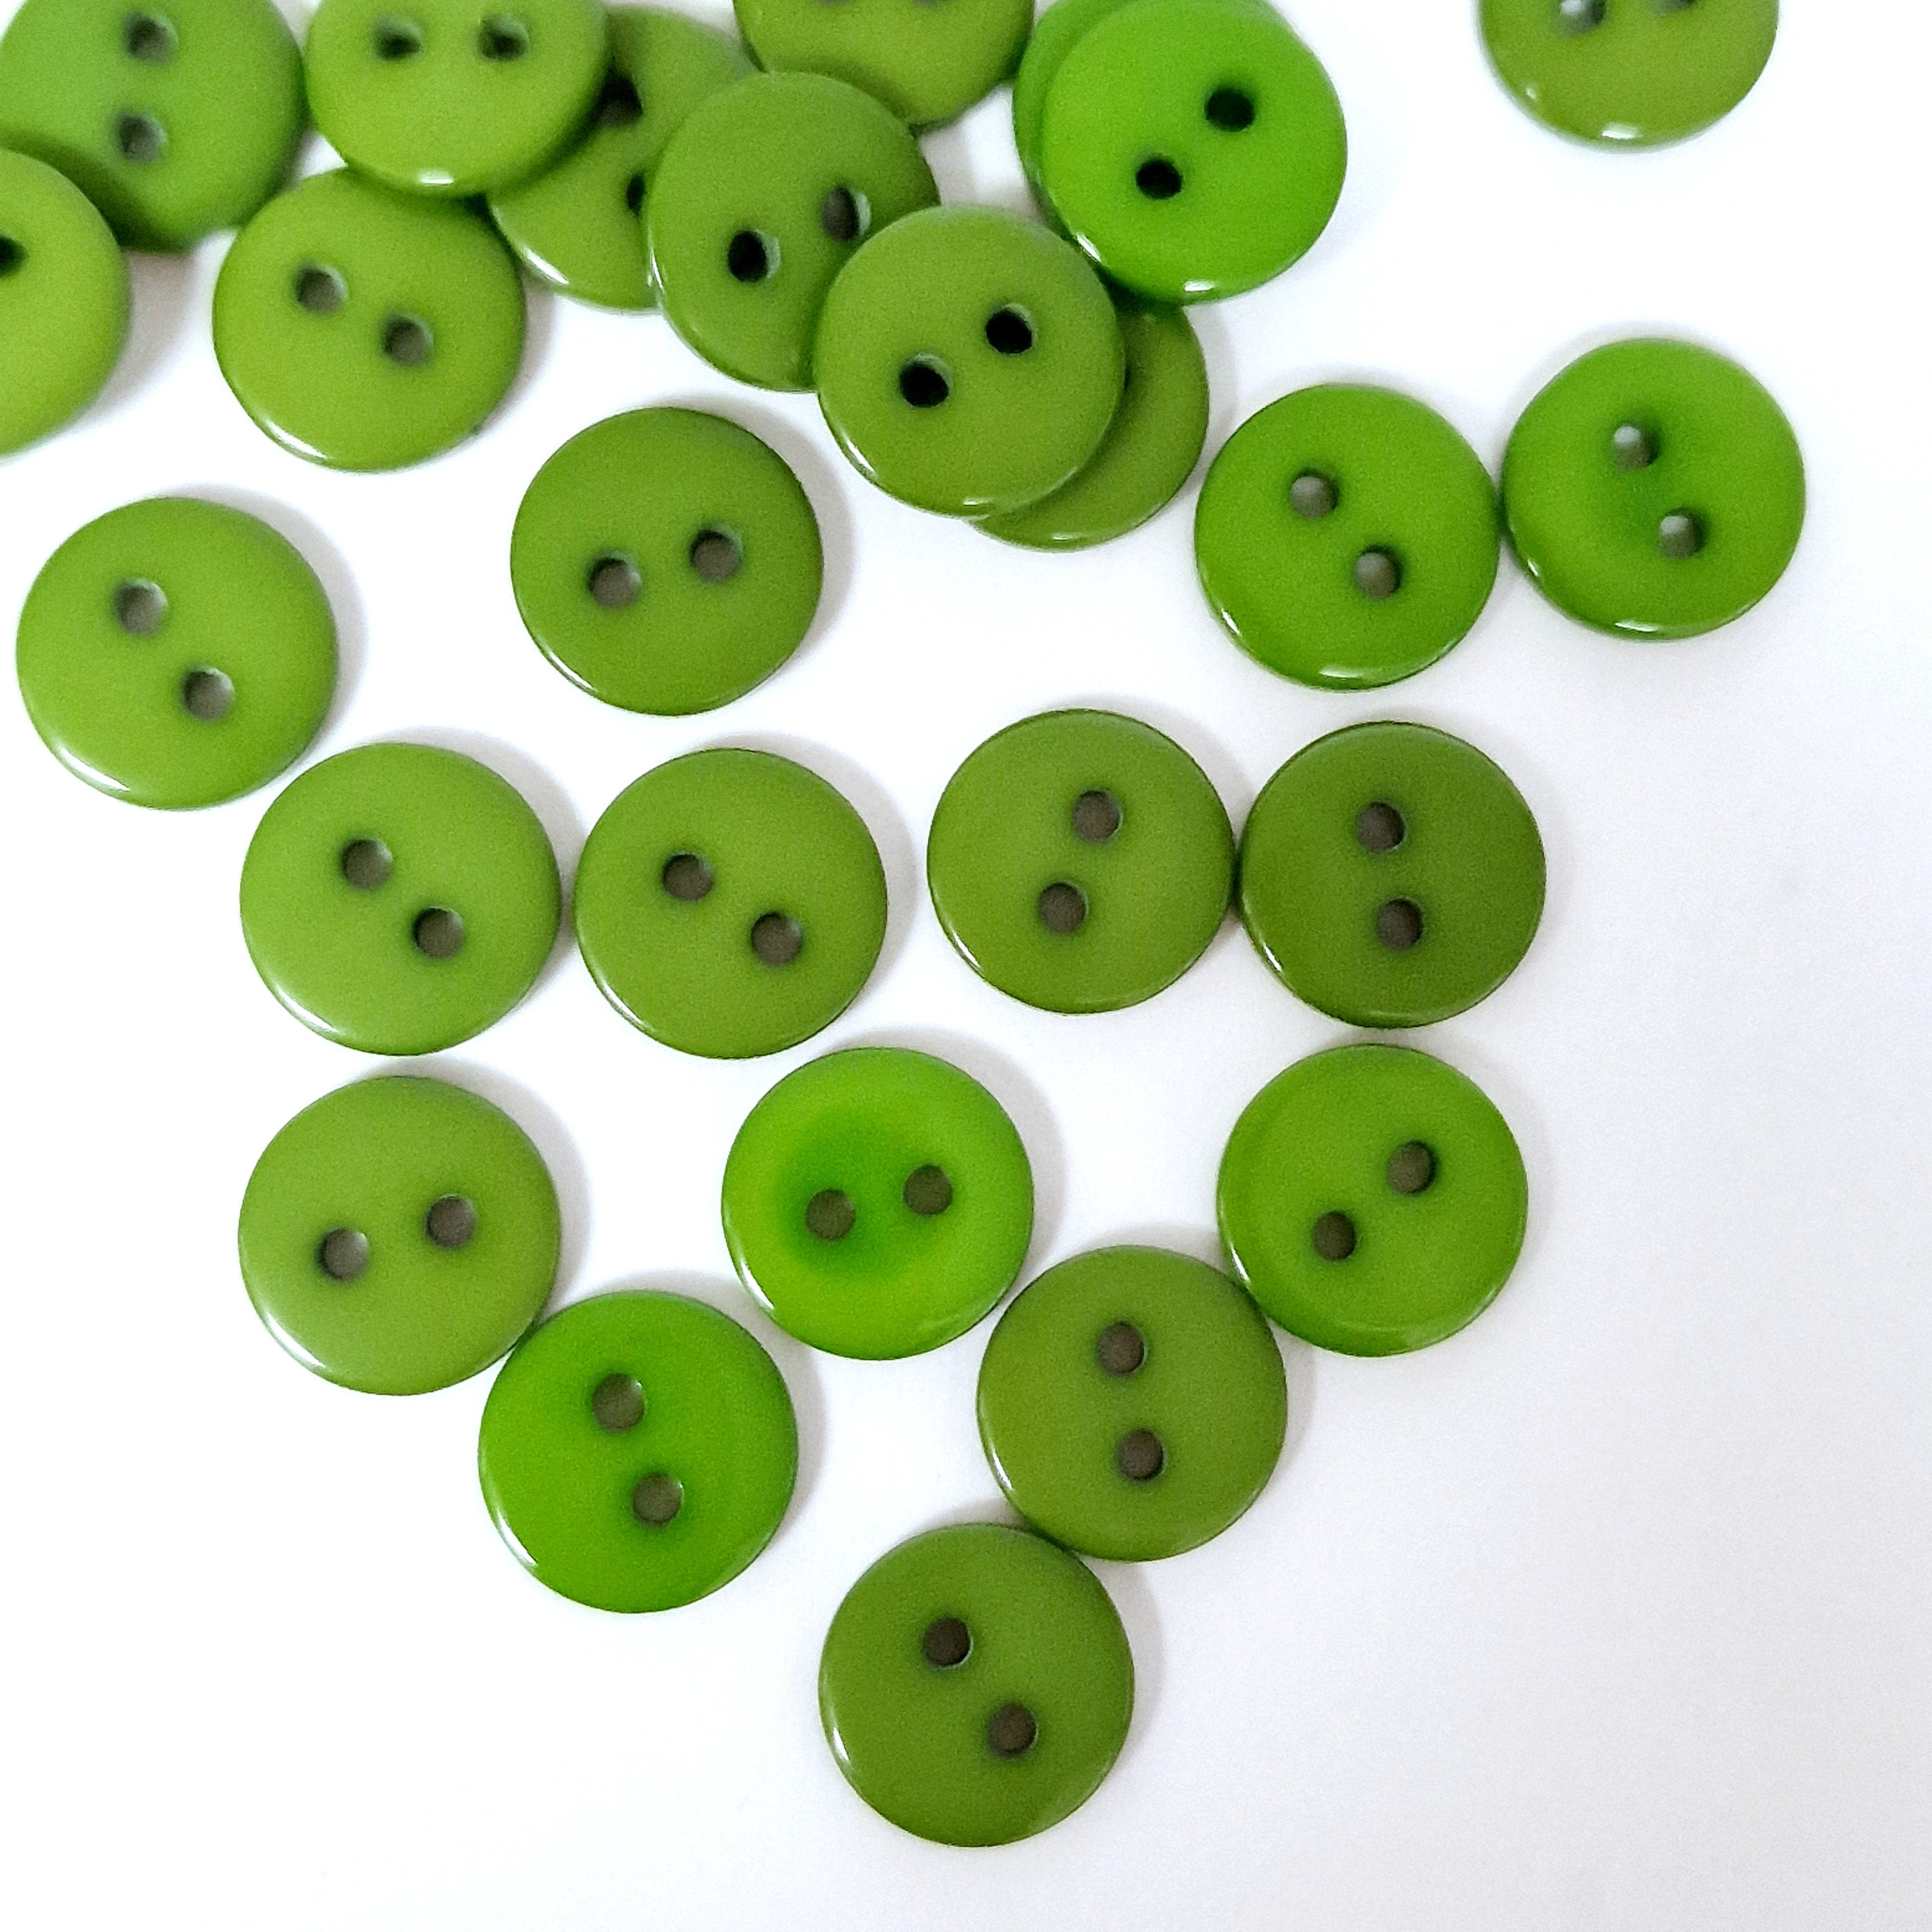 MajorCrafts 120pcs 10mm Olive Green Small 2 Holes Round Resin Sewing Buttons